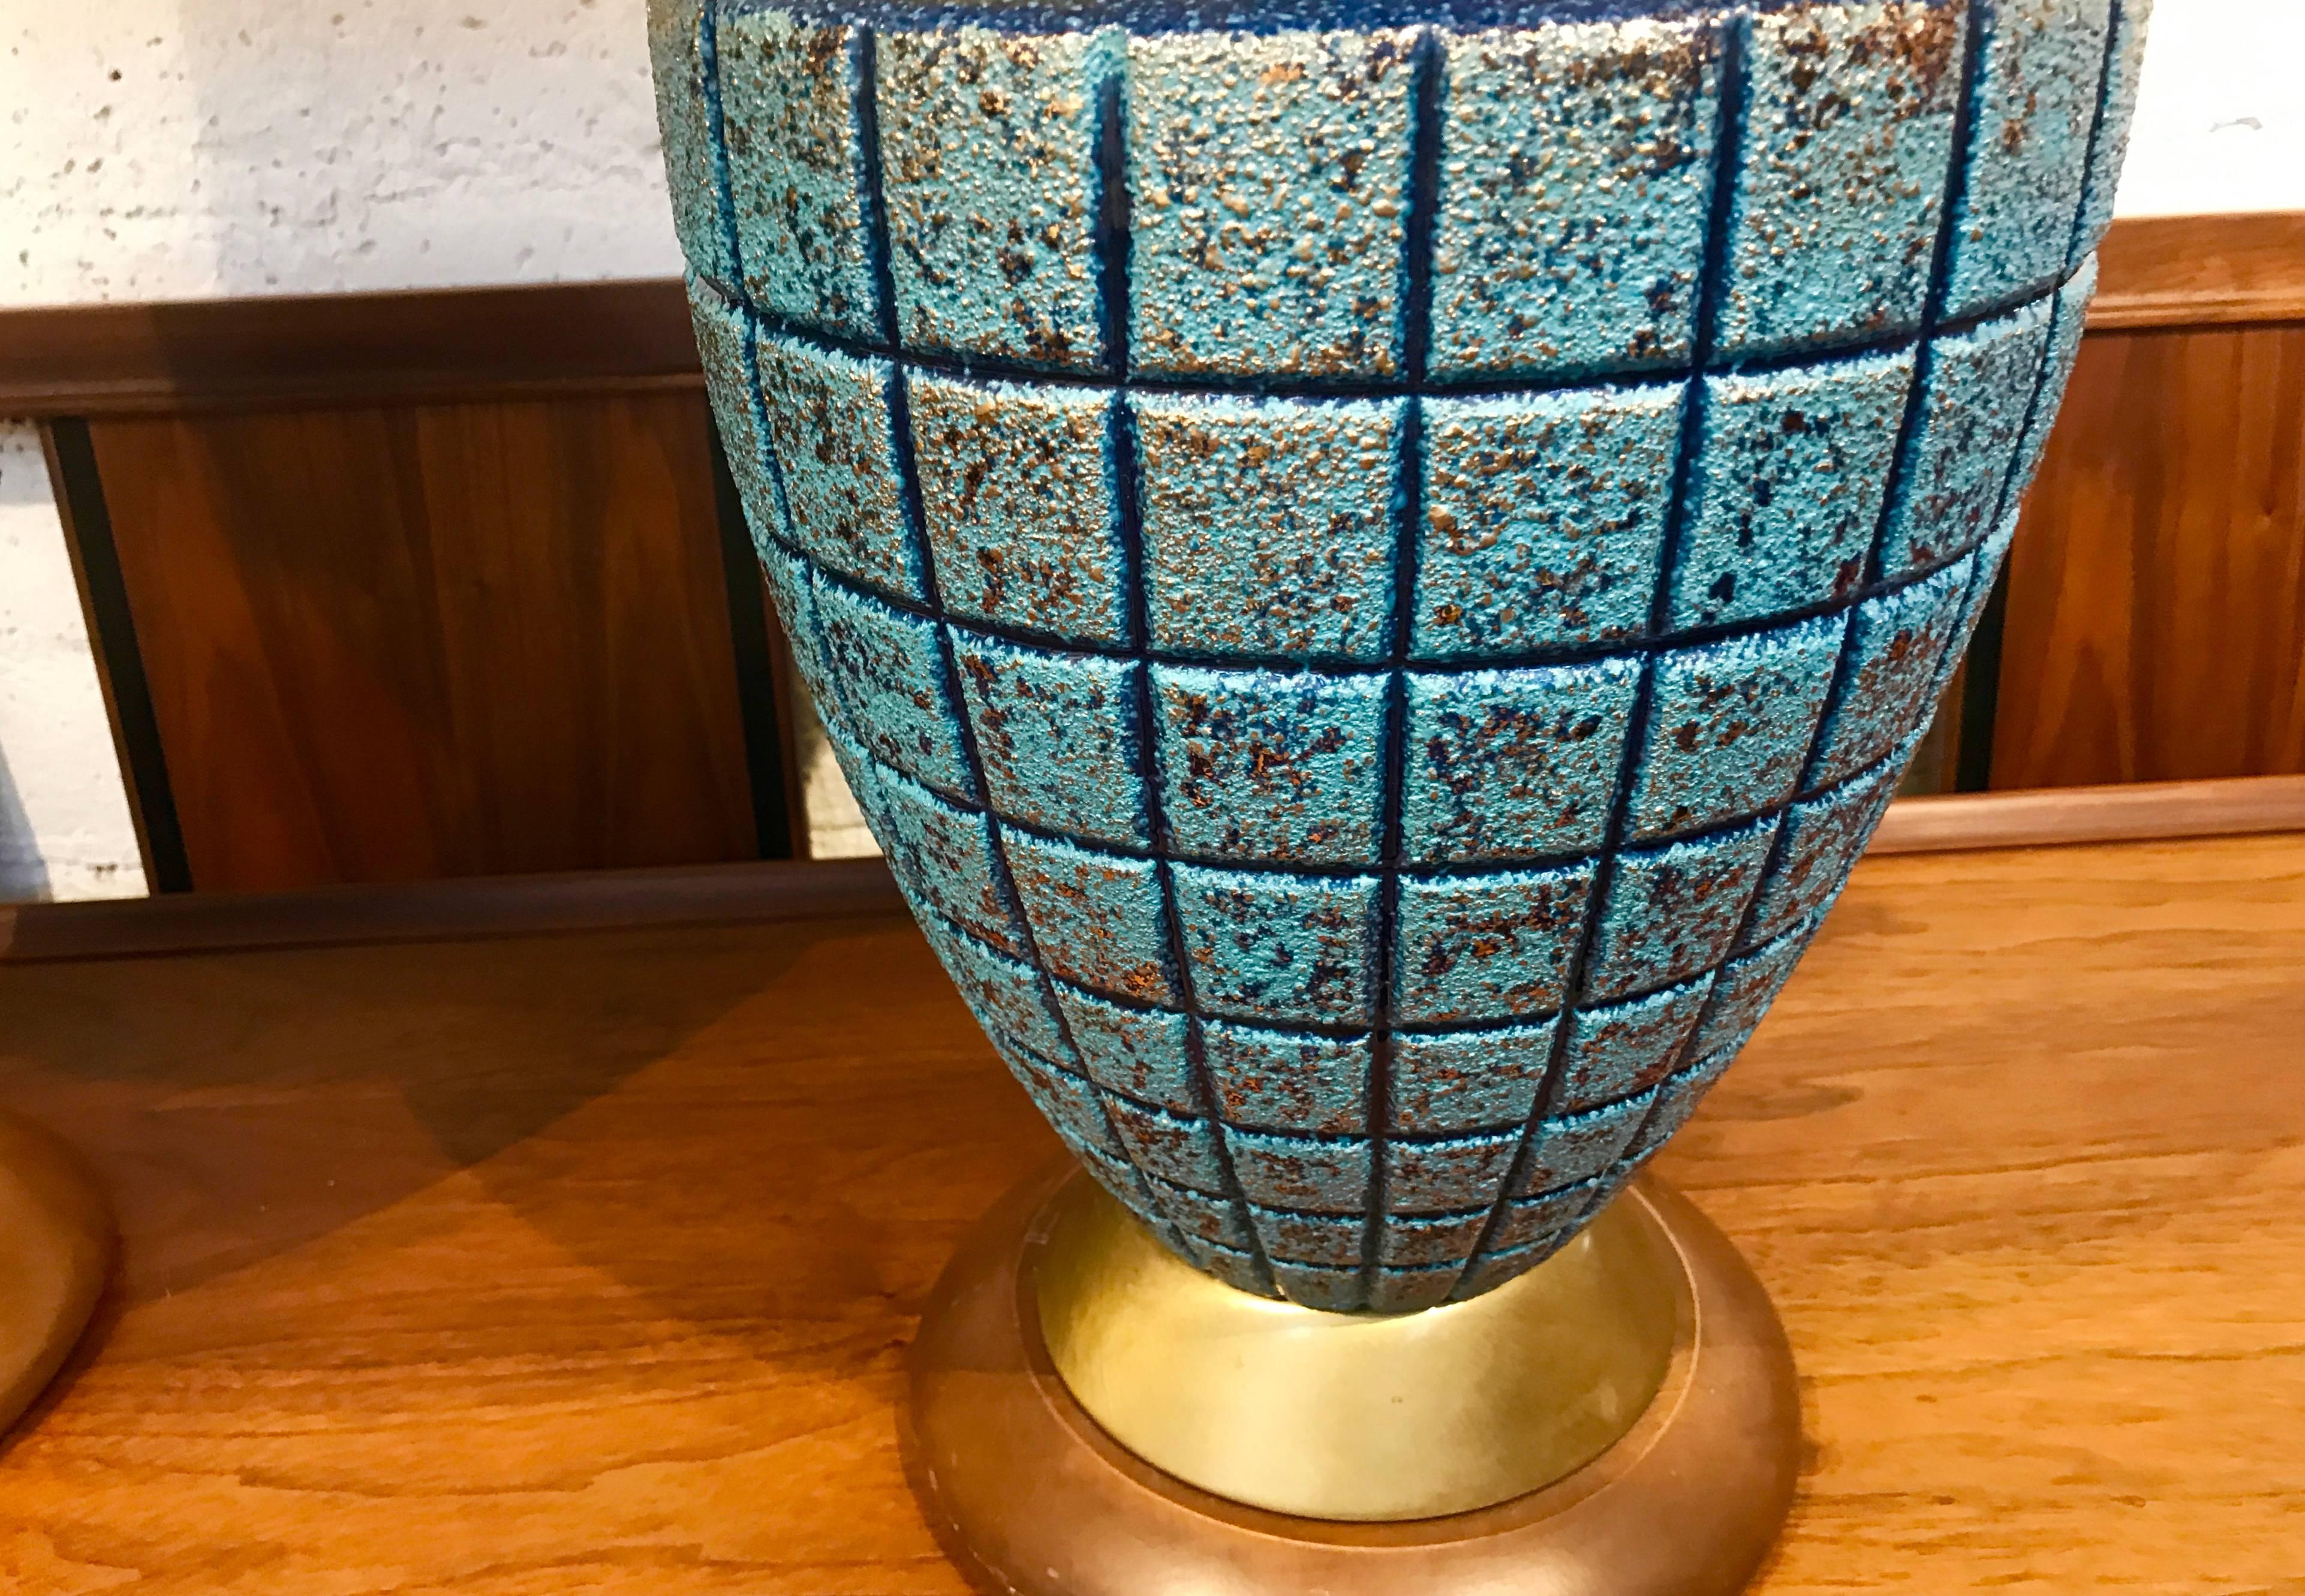 A nice 1960s pair of Ceramic lamps in nice age appropriate condition, with their original shades trimmed blue piping. These lamps have been rewired and are ready to go. The wood bases have some scuff marks and minor nicks. The shades are in good age